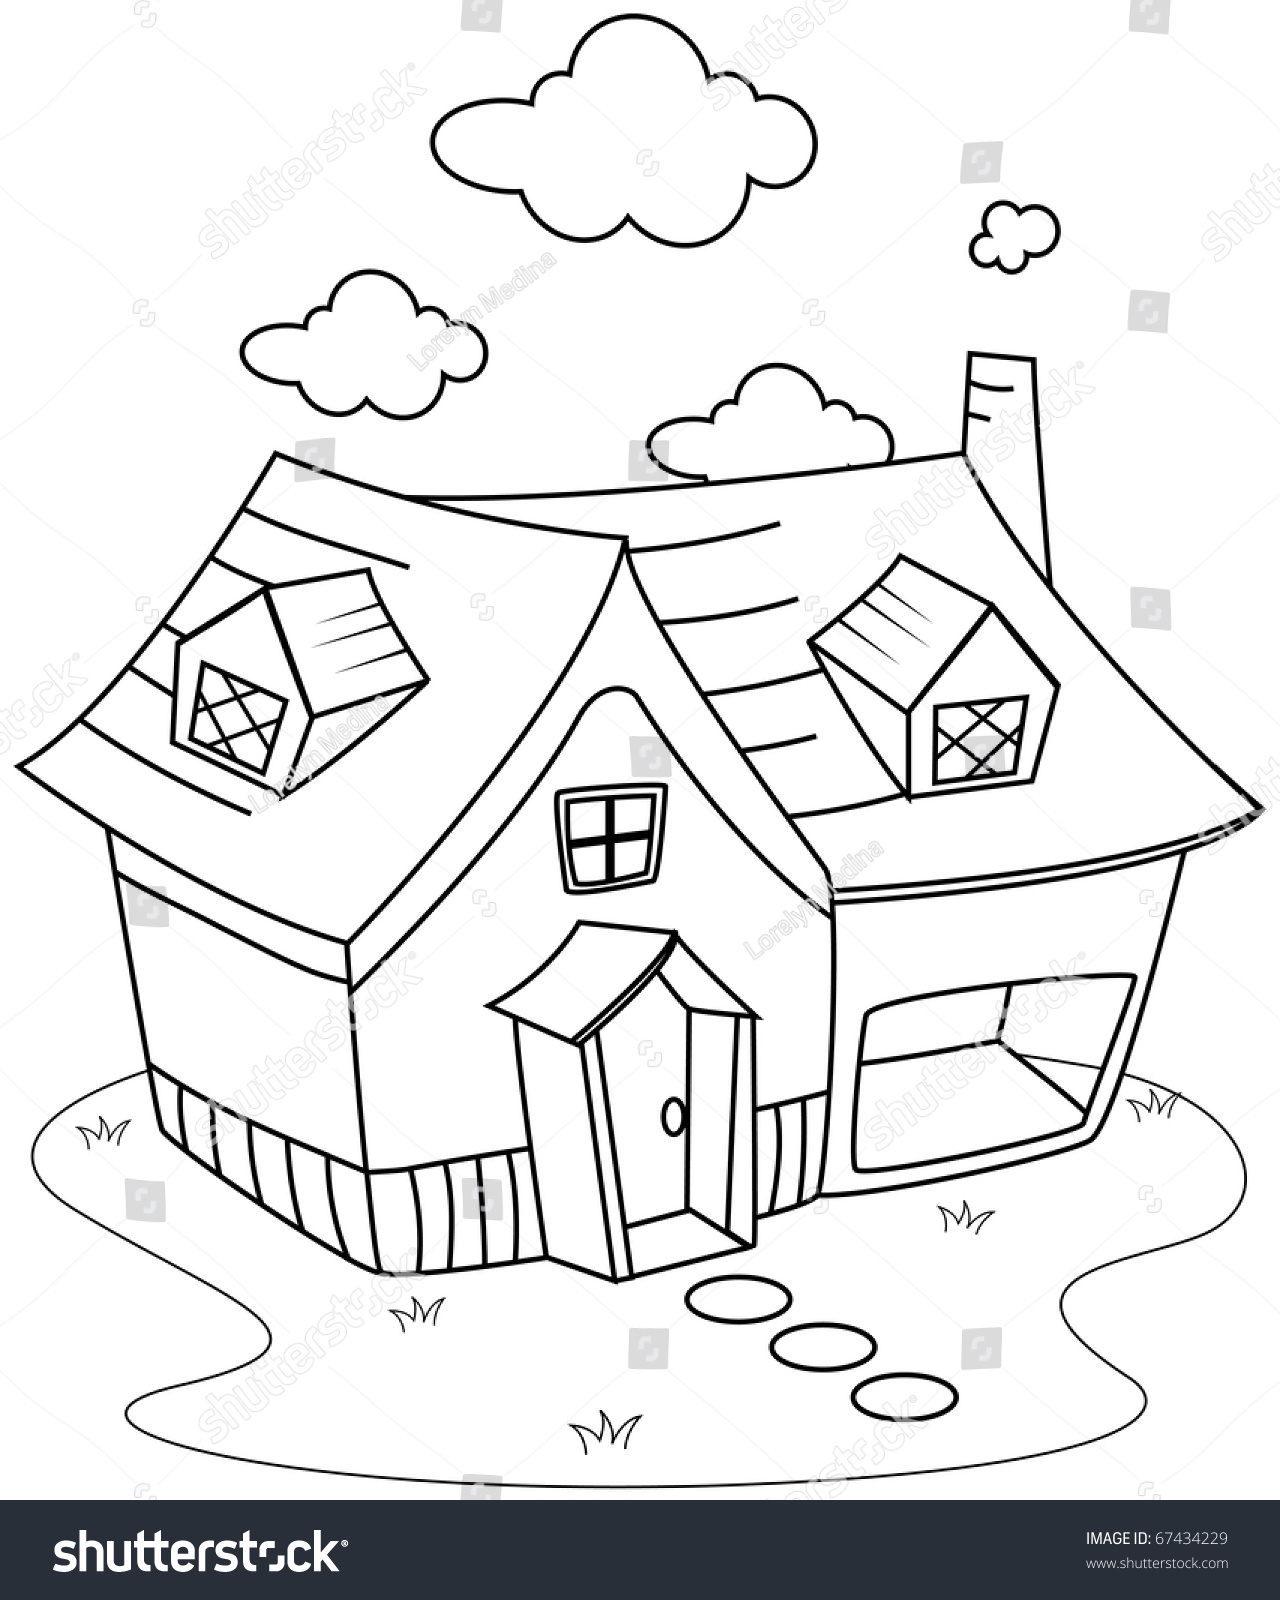 Line Art Illustration Of A Cute Little House Coloring